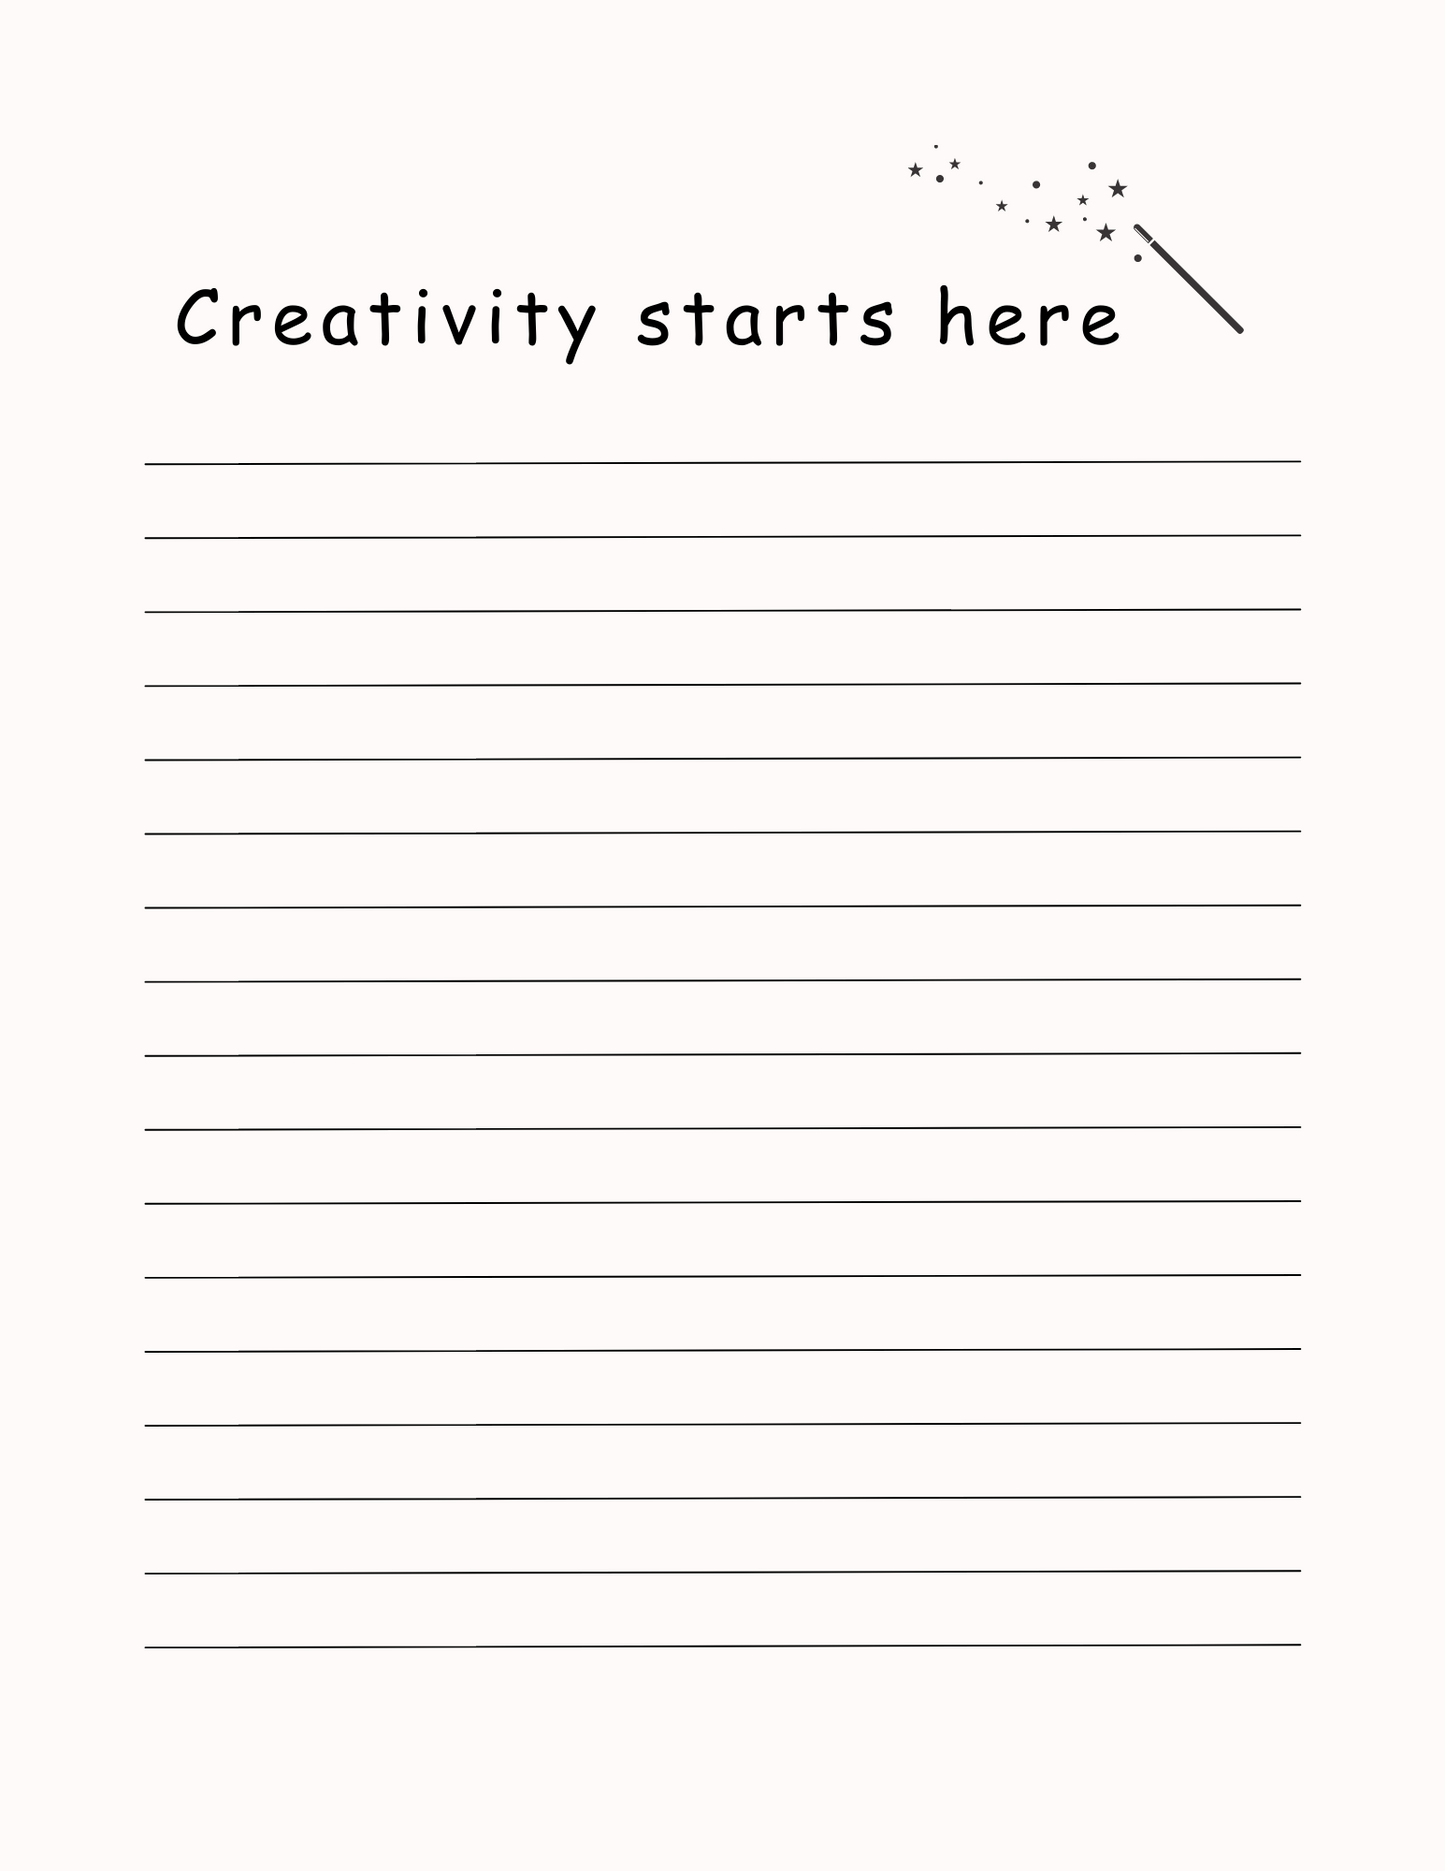 My Creativity Journal- 100 lined pages